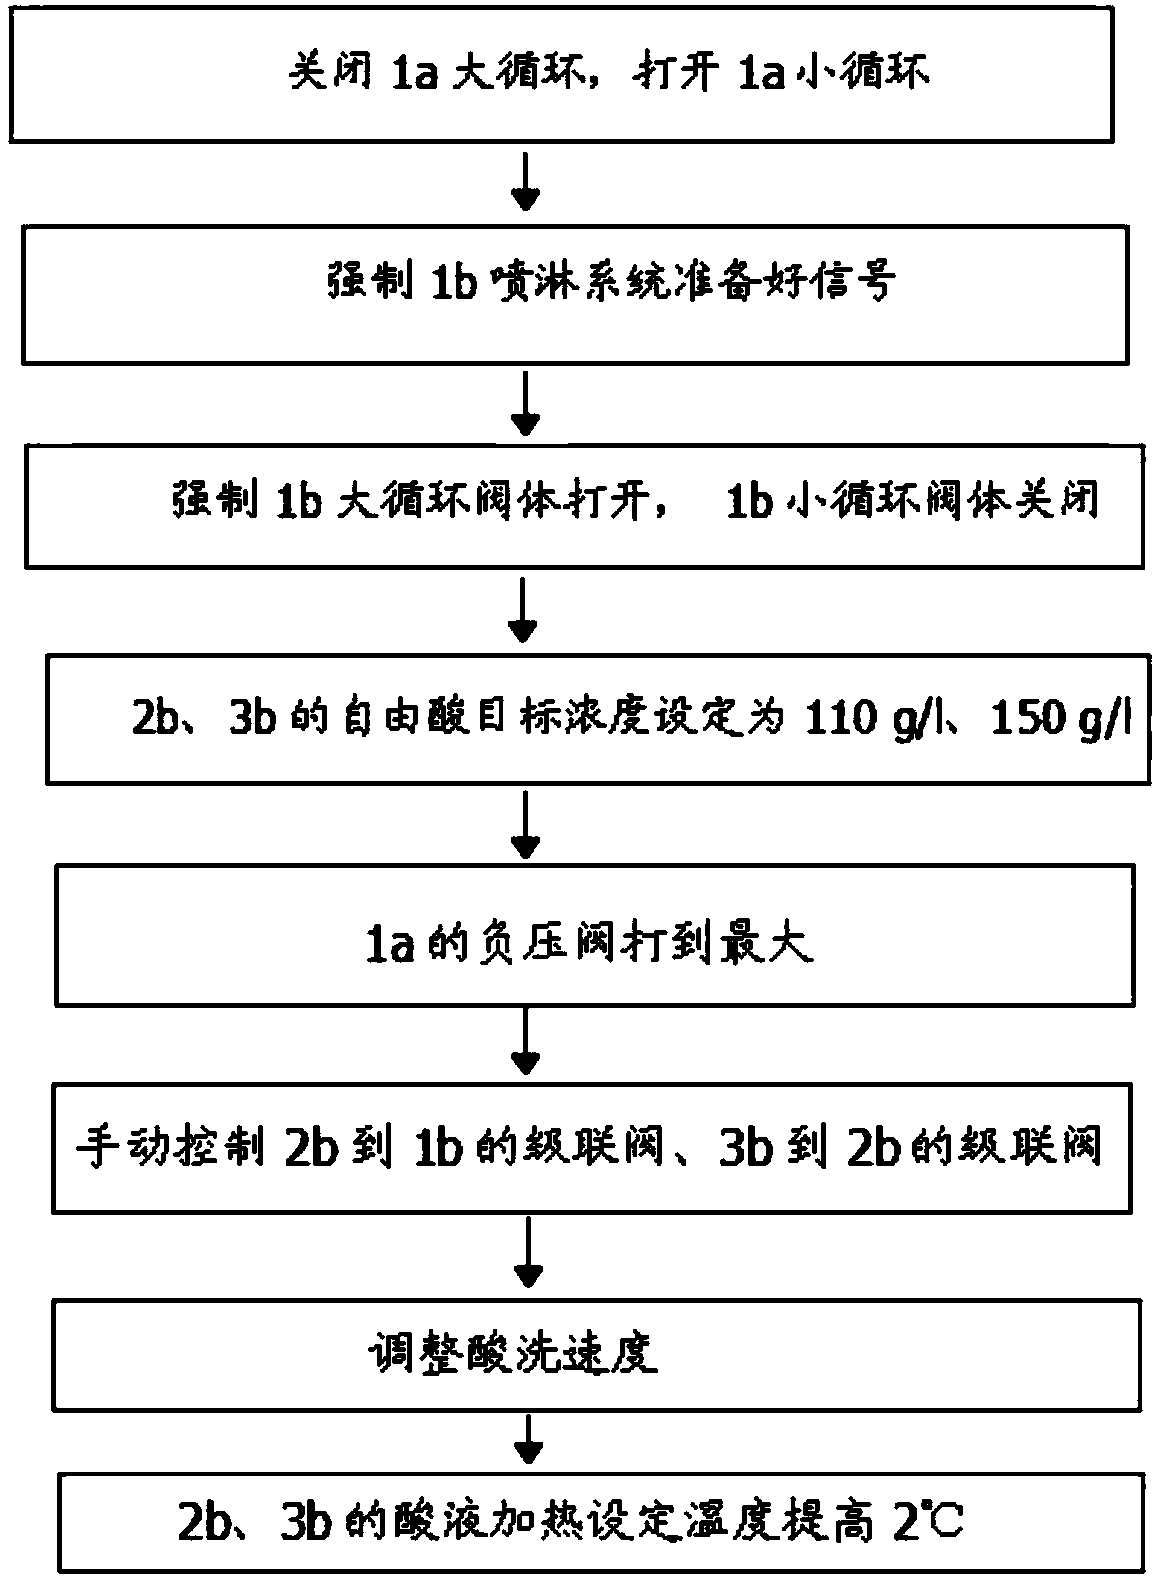 System and method for acid leakage treatment of acid tank and acid tank in cold rolling and acid rolling mill